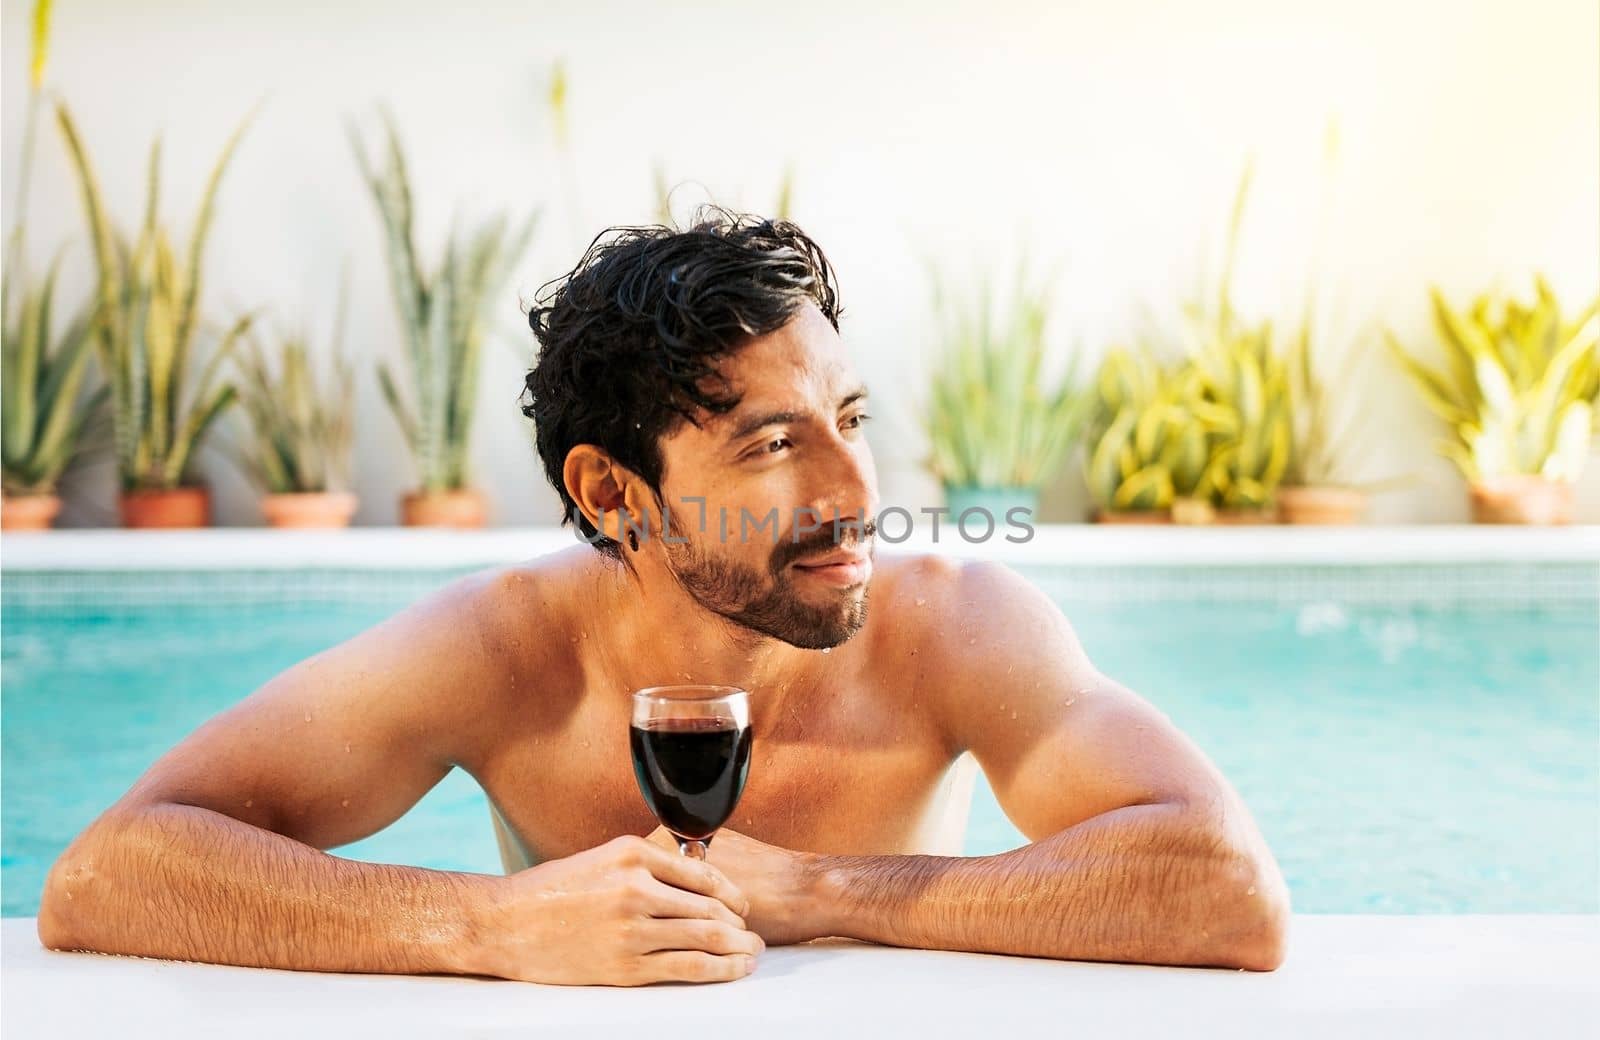 Portrait of man at the edge of swimming pool with a glass of wine. Handsome man in swimming pool holding glass of wine. Handsome guy on the edge of the pool holding a glass of wine by isaiphoto